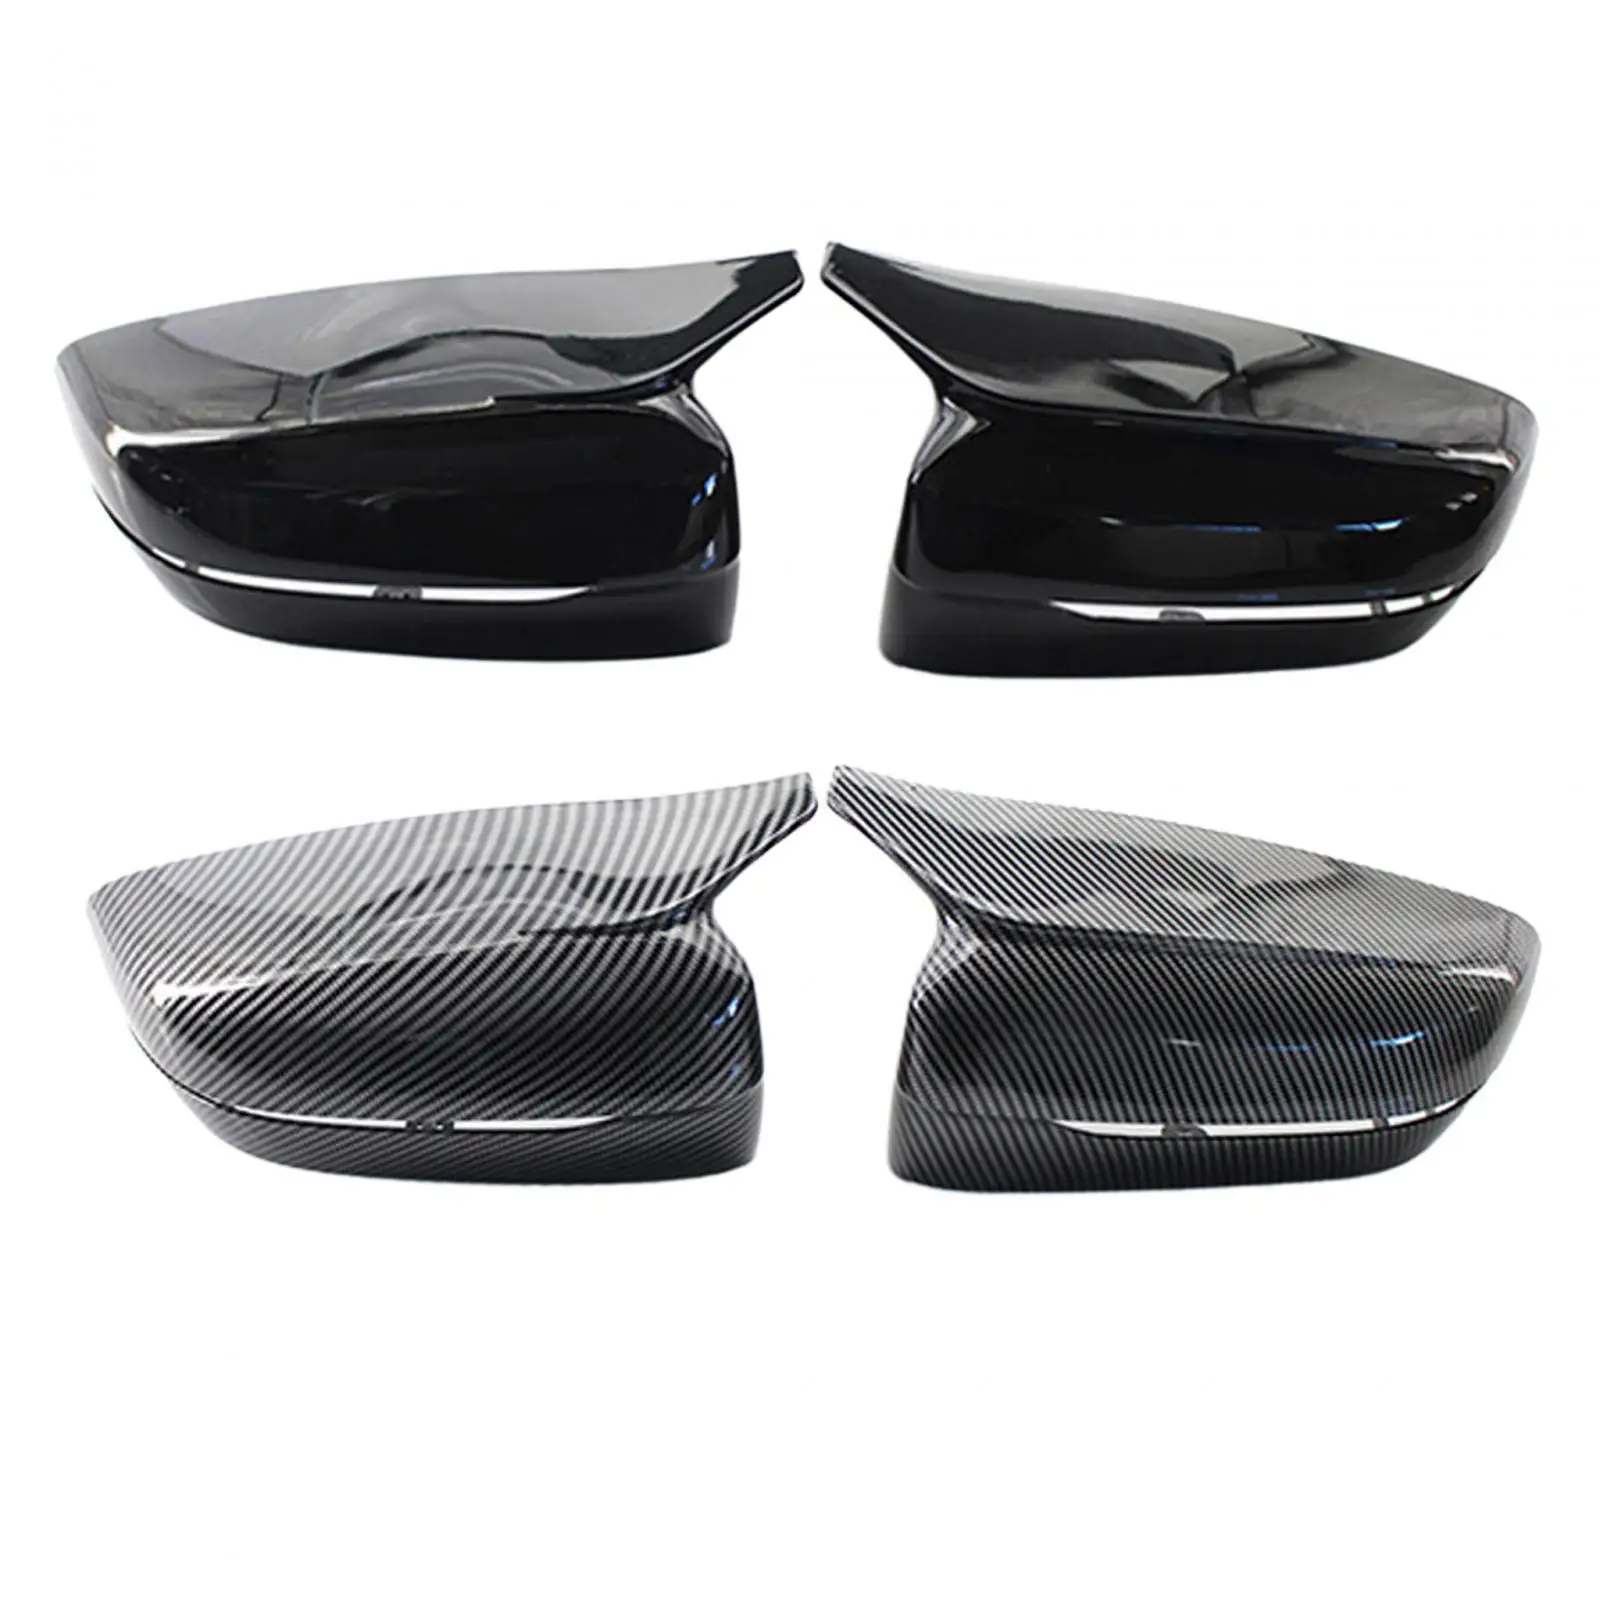 51167422719 Side Mirror Covers Caps Car Accessories Replaces 51167422720 Car Rearview Mirror Cover for G22 G23 4 Series1